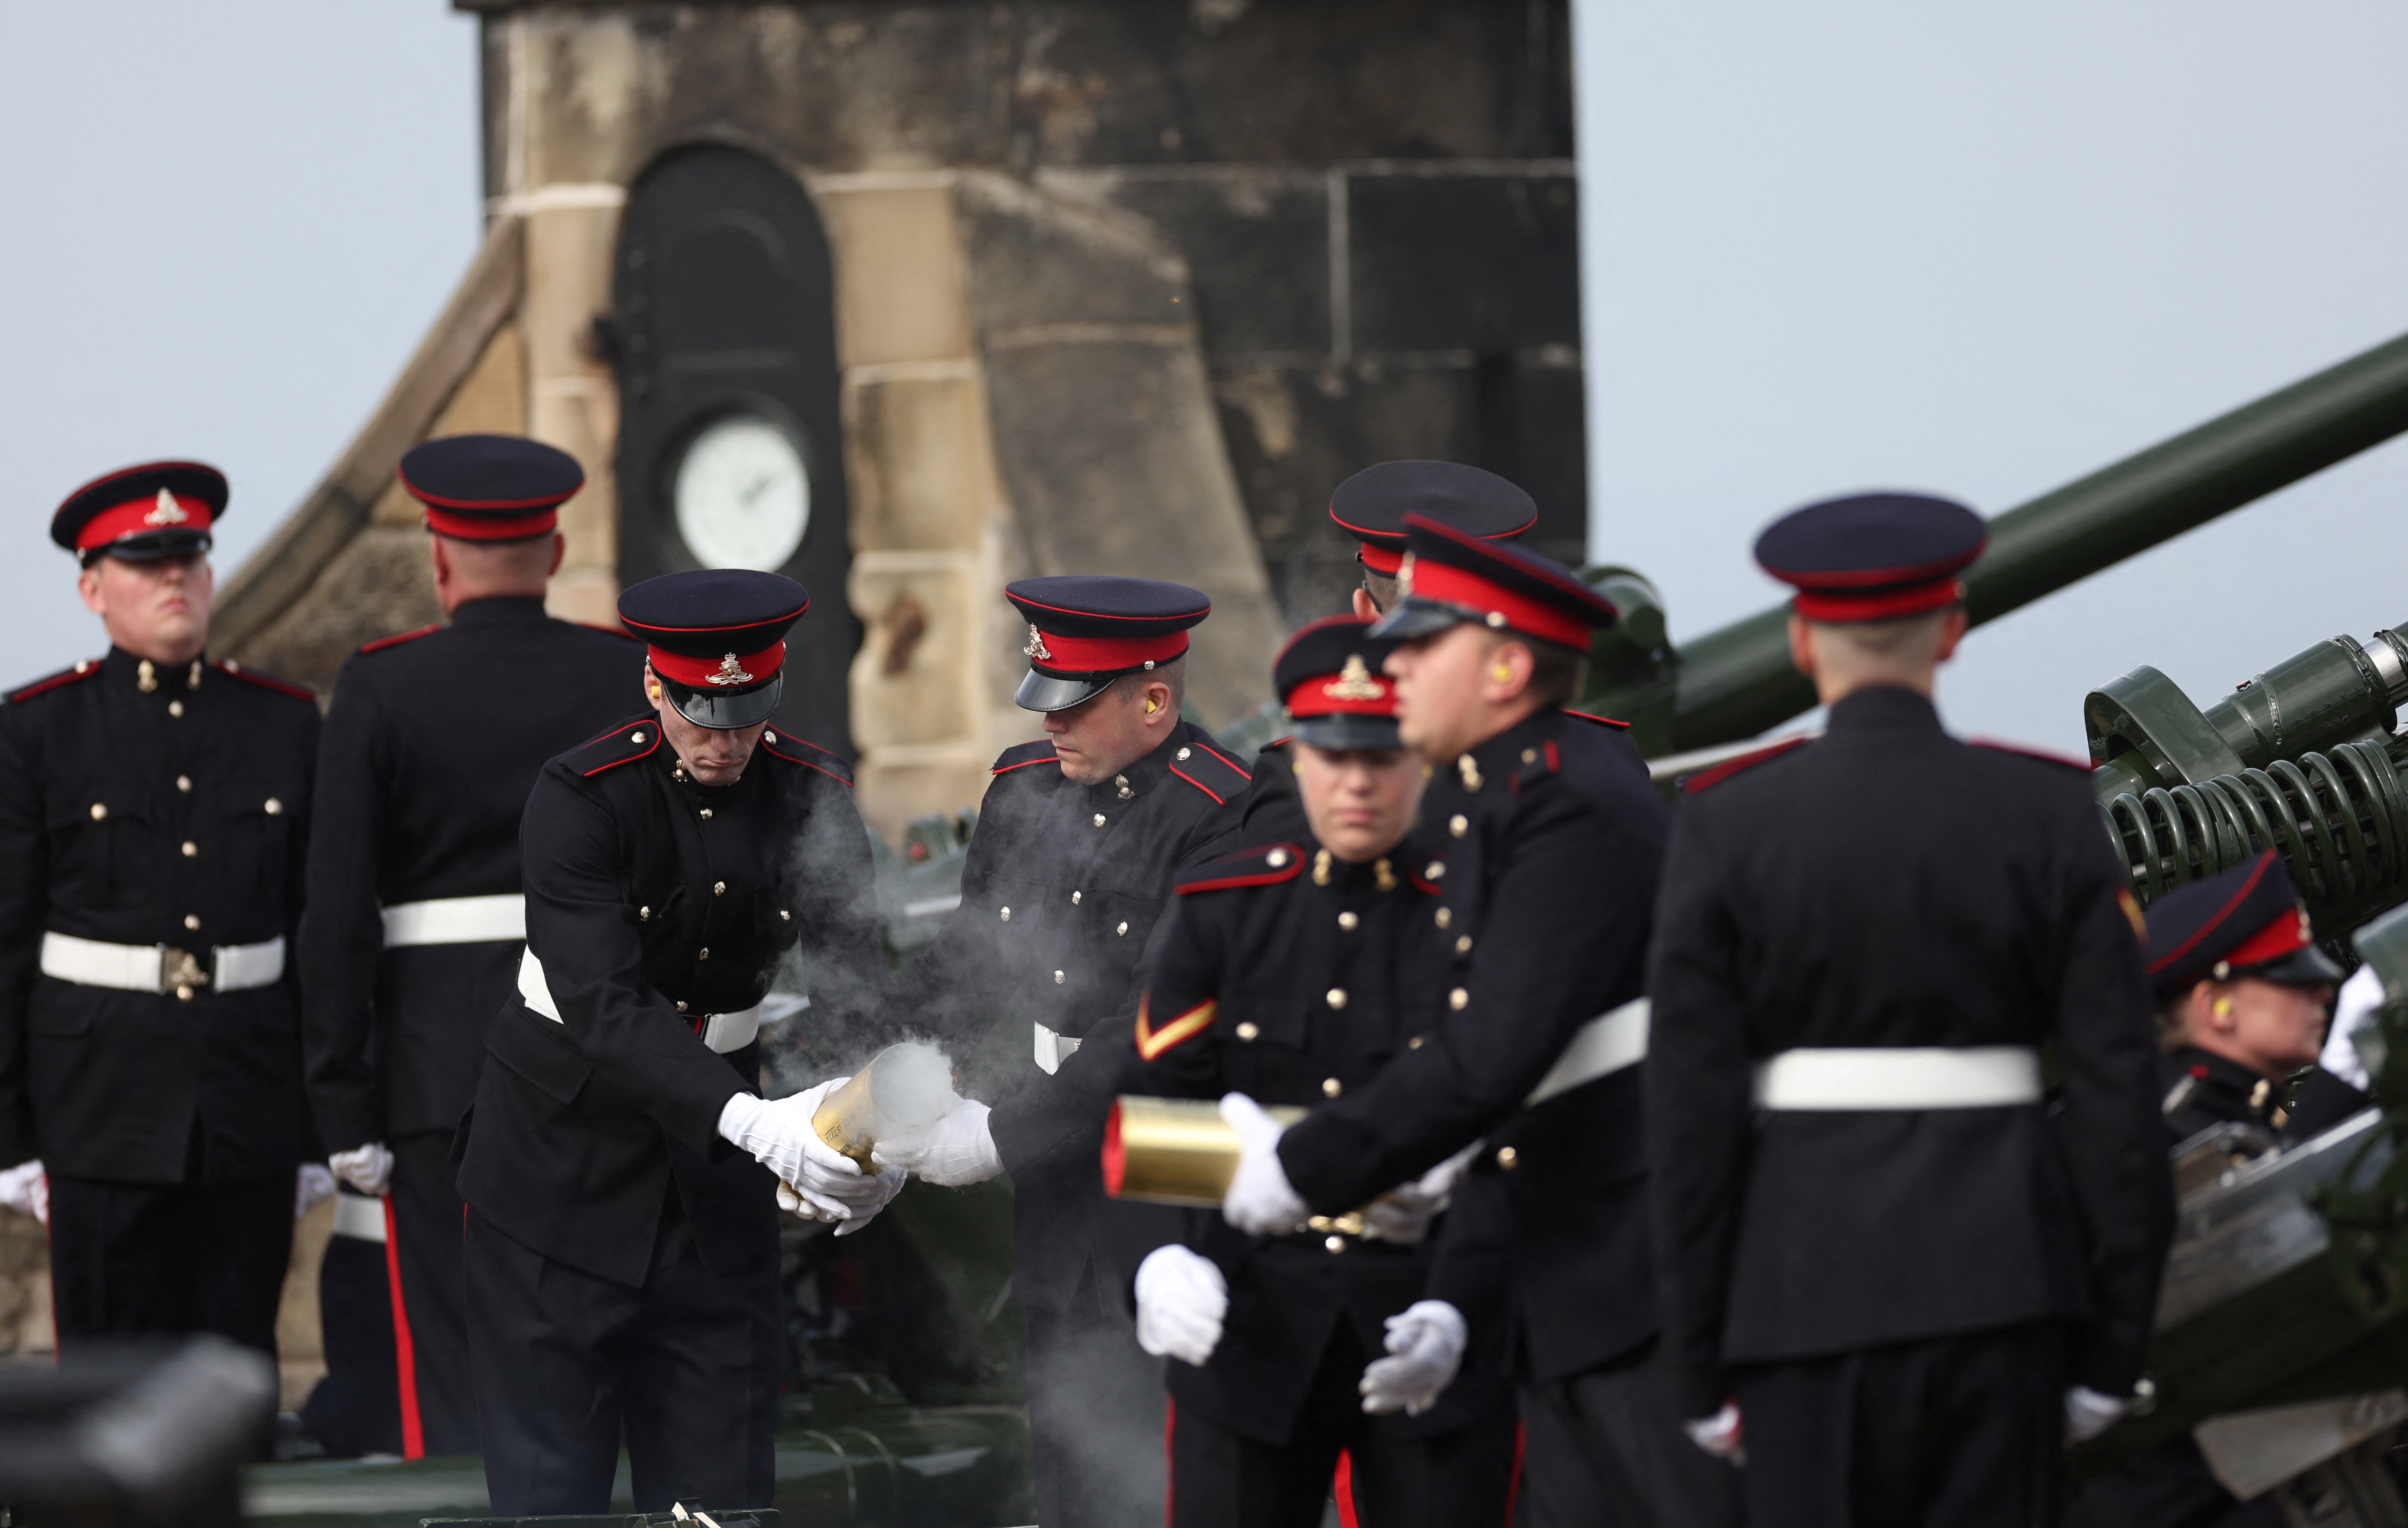 96 cannon salvos were fired, one for each year of the Queen's reign (REUTERS/Carl Recine)